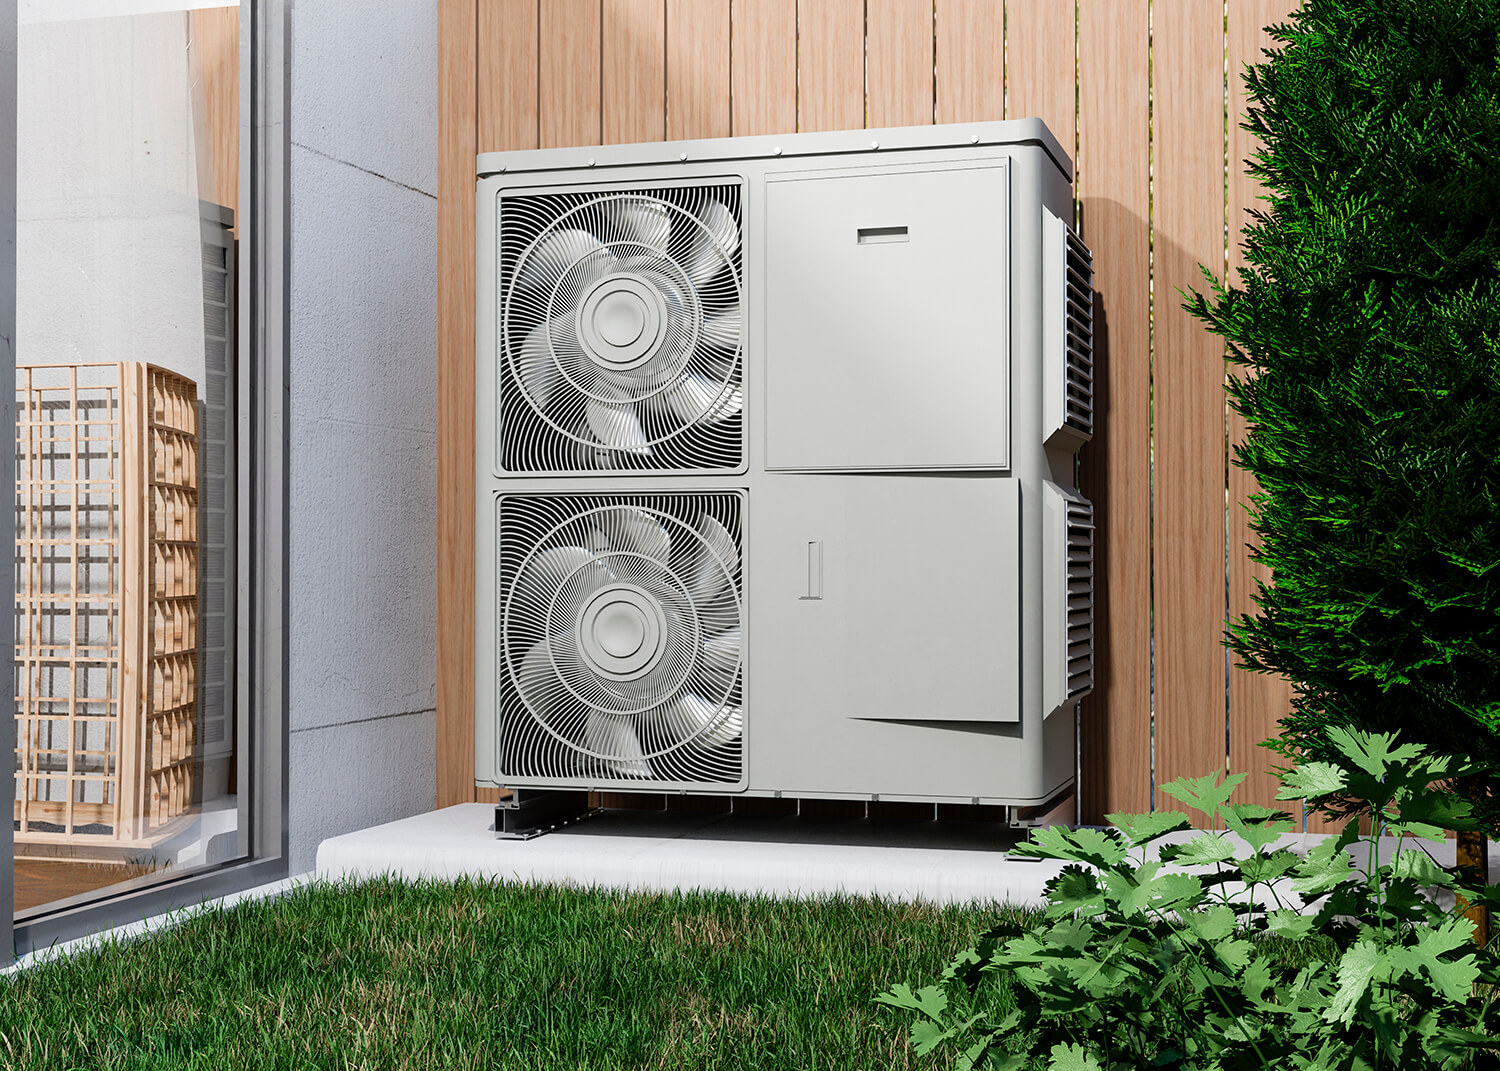 My sibling specializes in air conditioner repair in Jacksonville FL